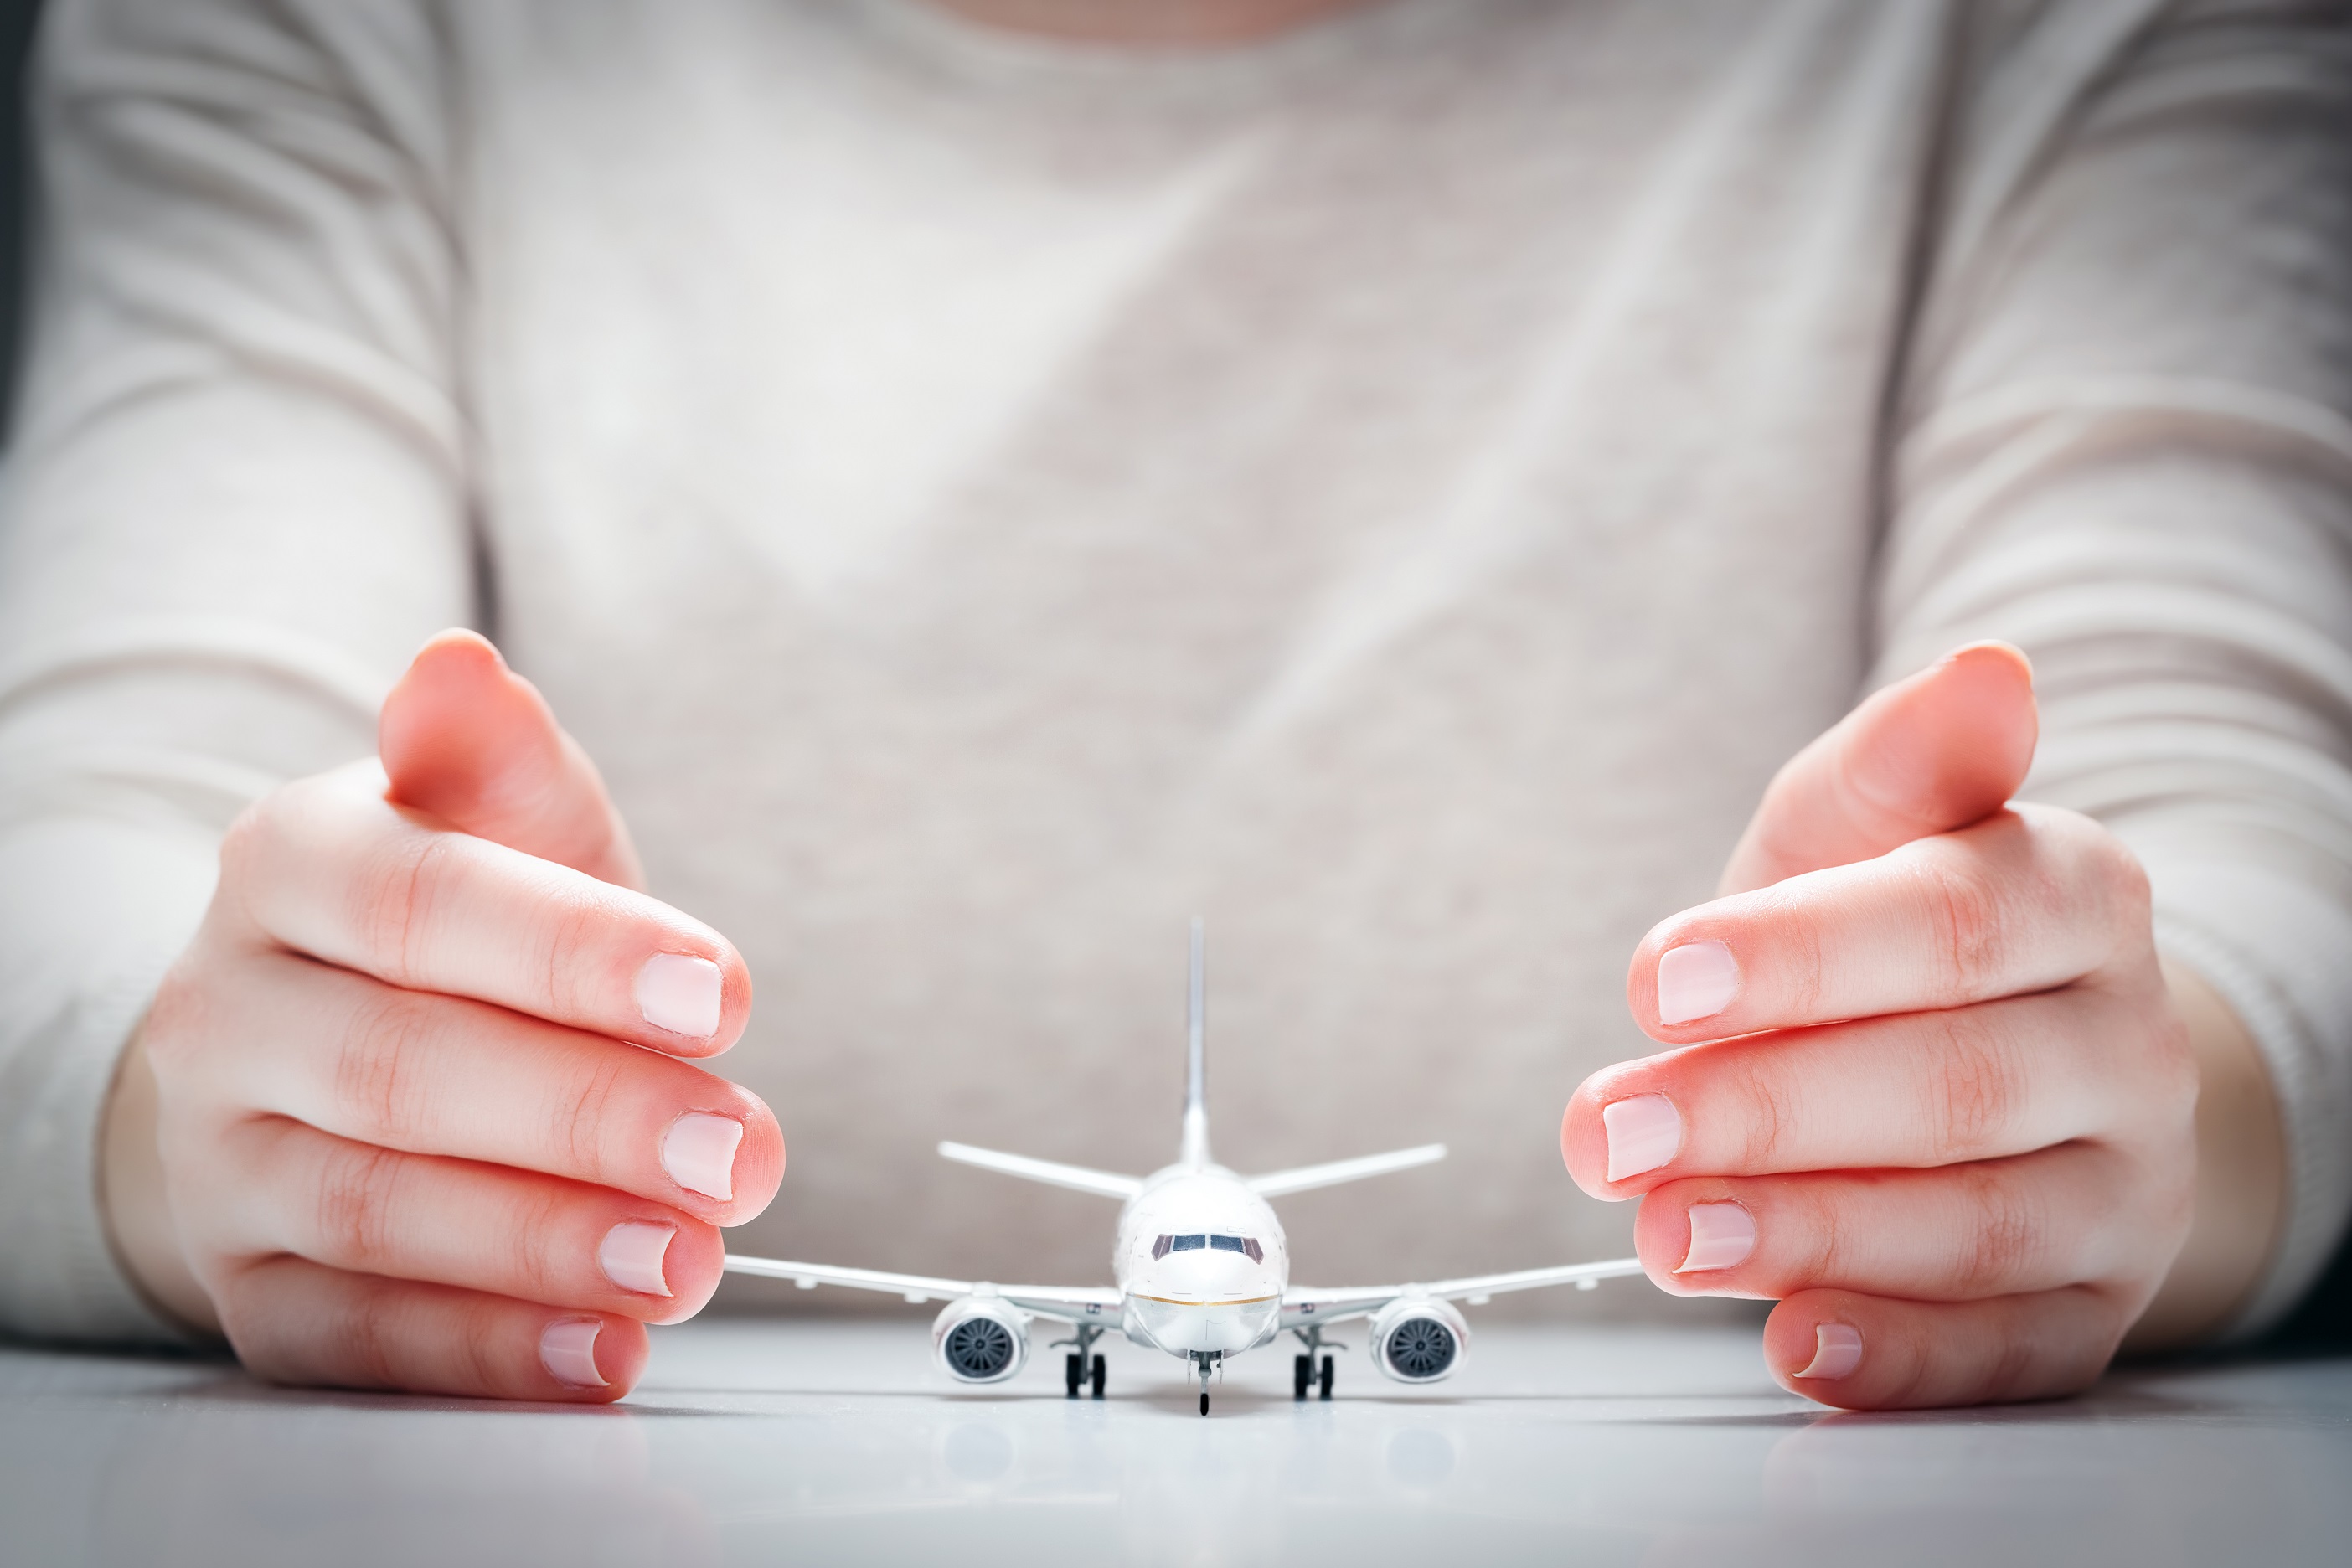 Strategies for Small Carriers: Marketing, Alliances and Tourism